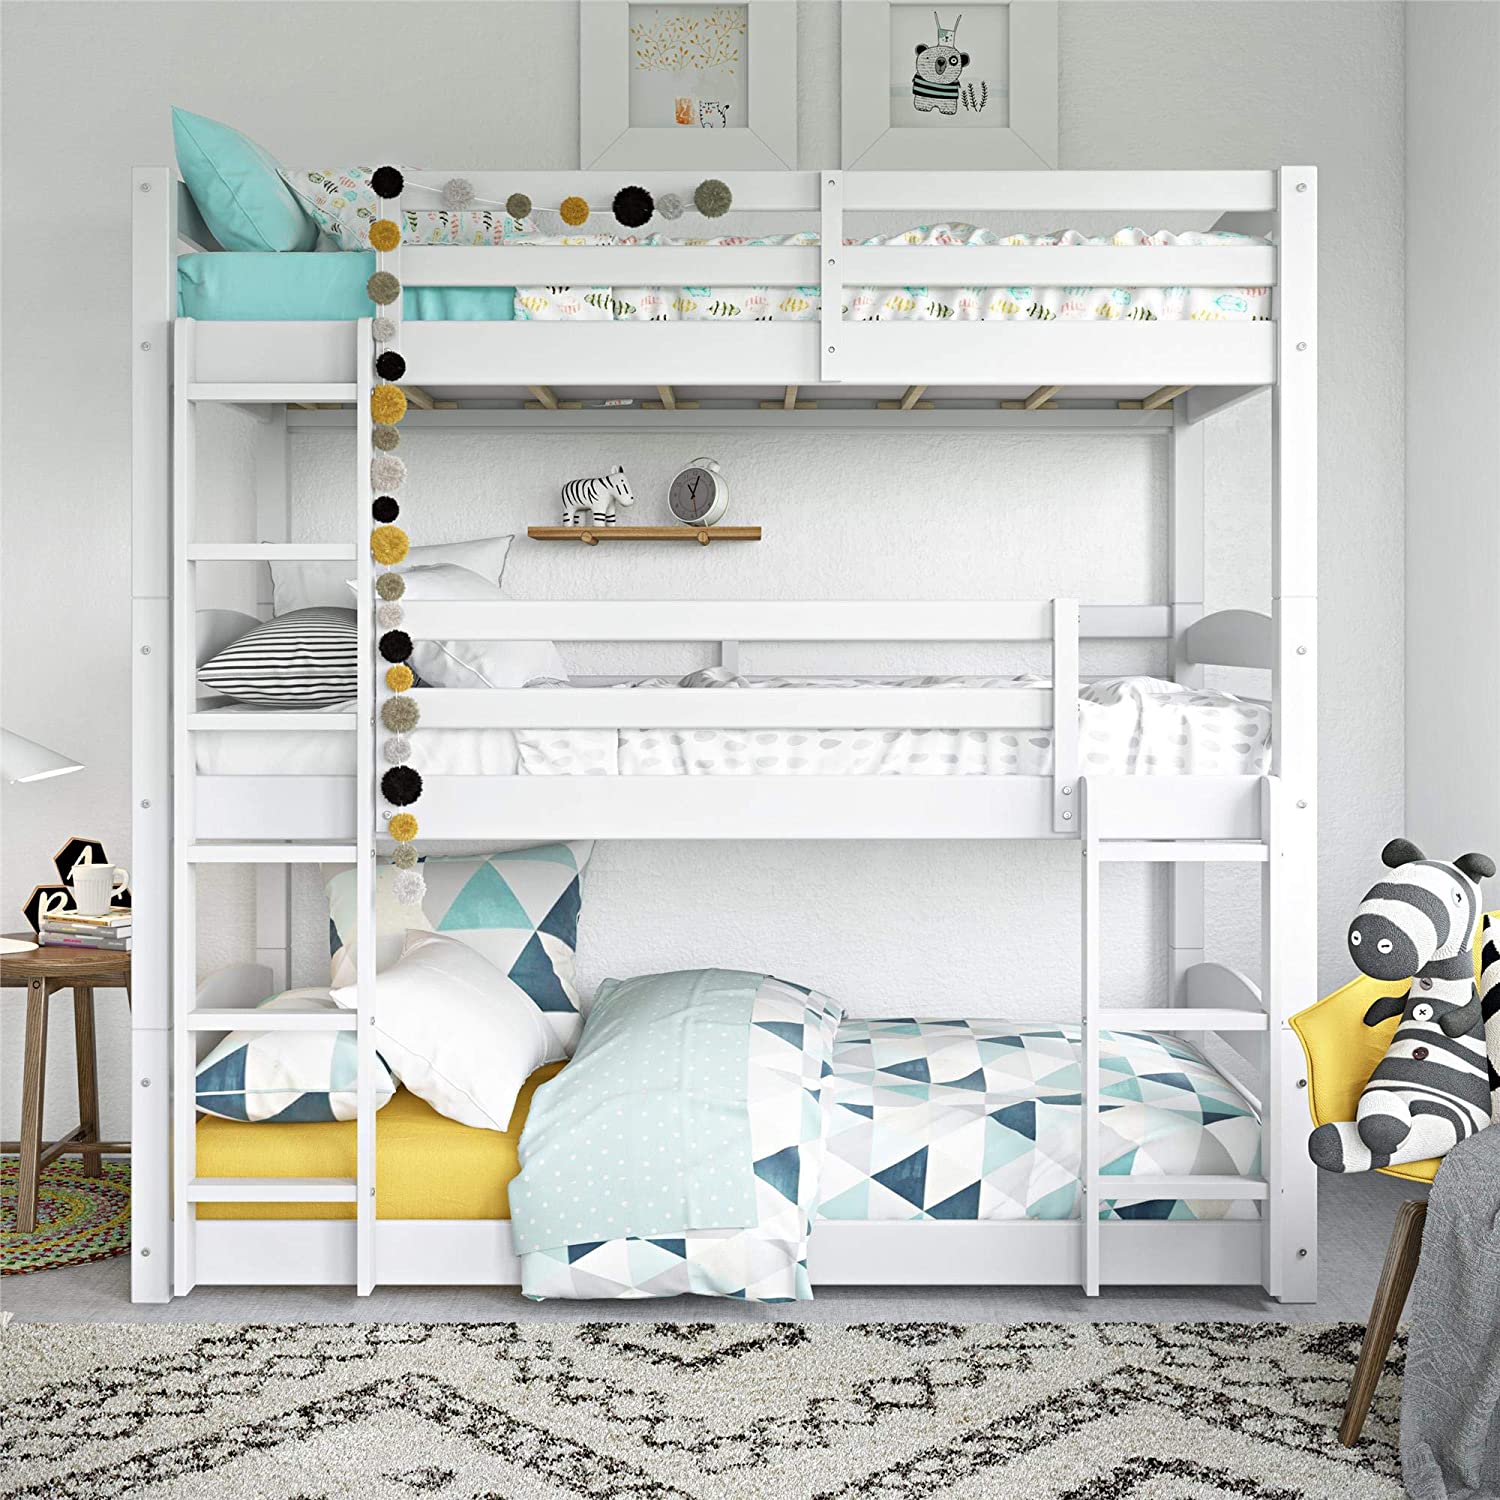 26 Bunk Beds You Ll Want For Yourself, Kids Bunk Bed Ideas